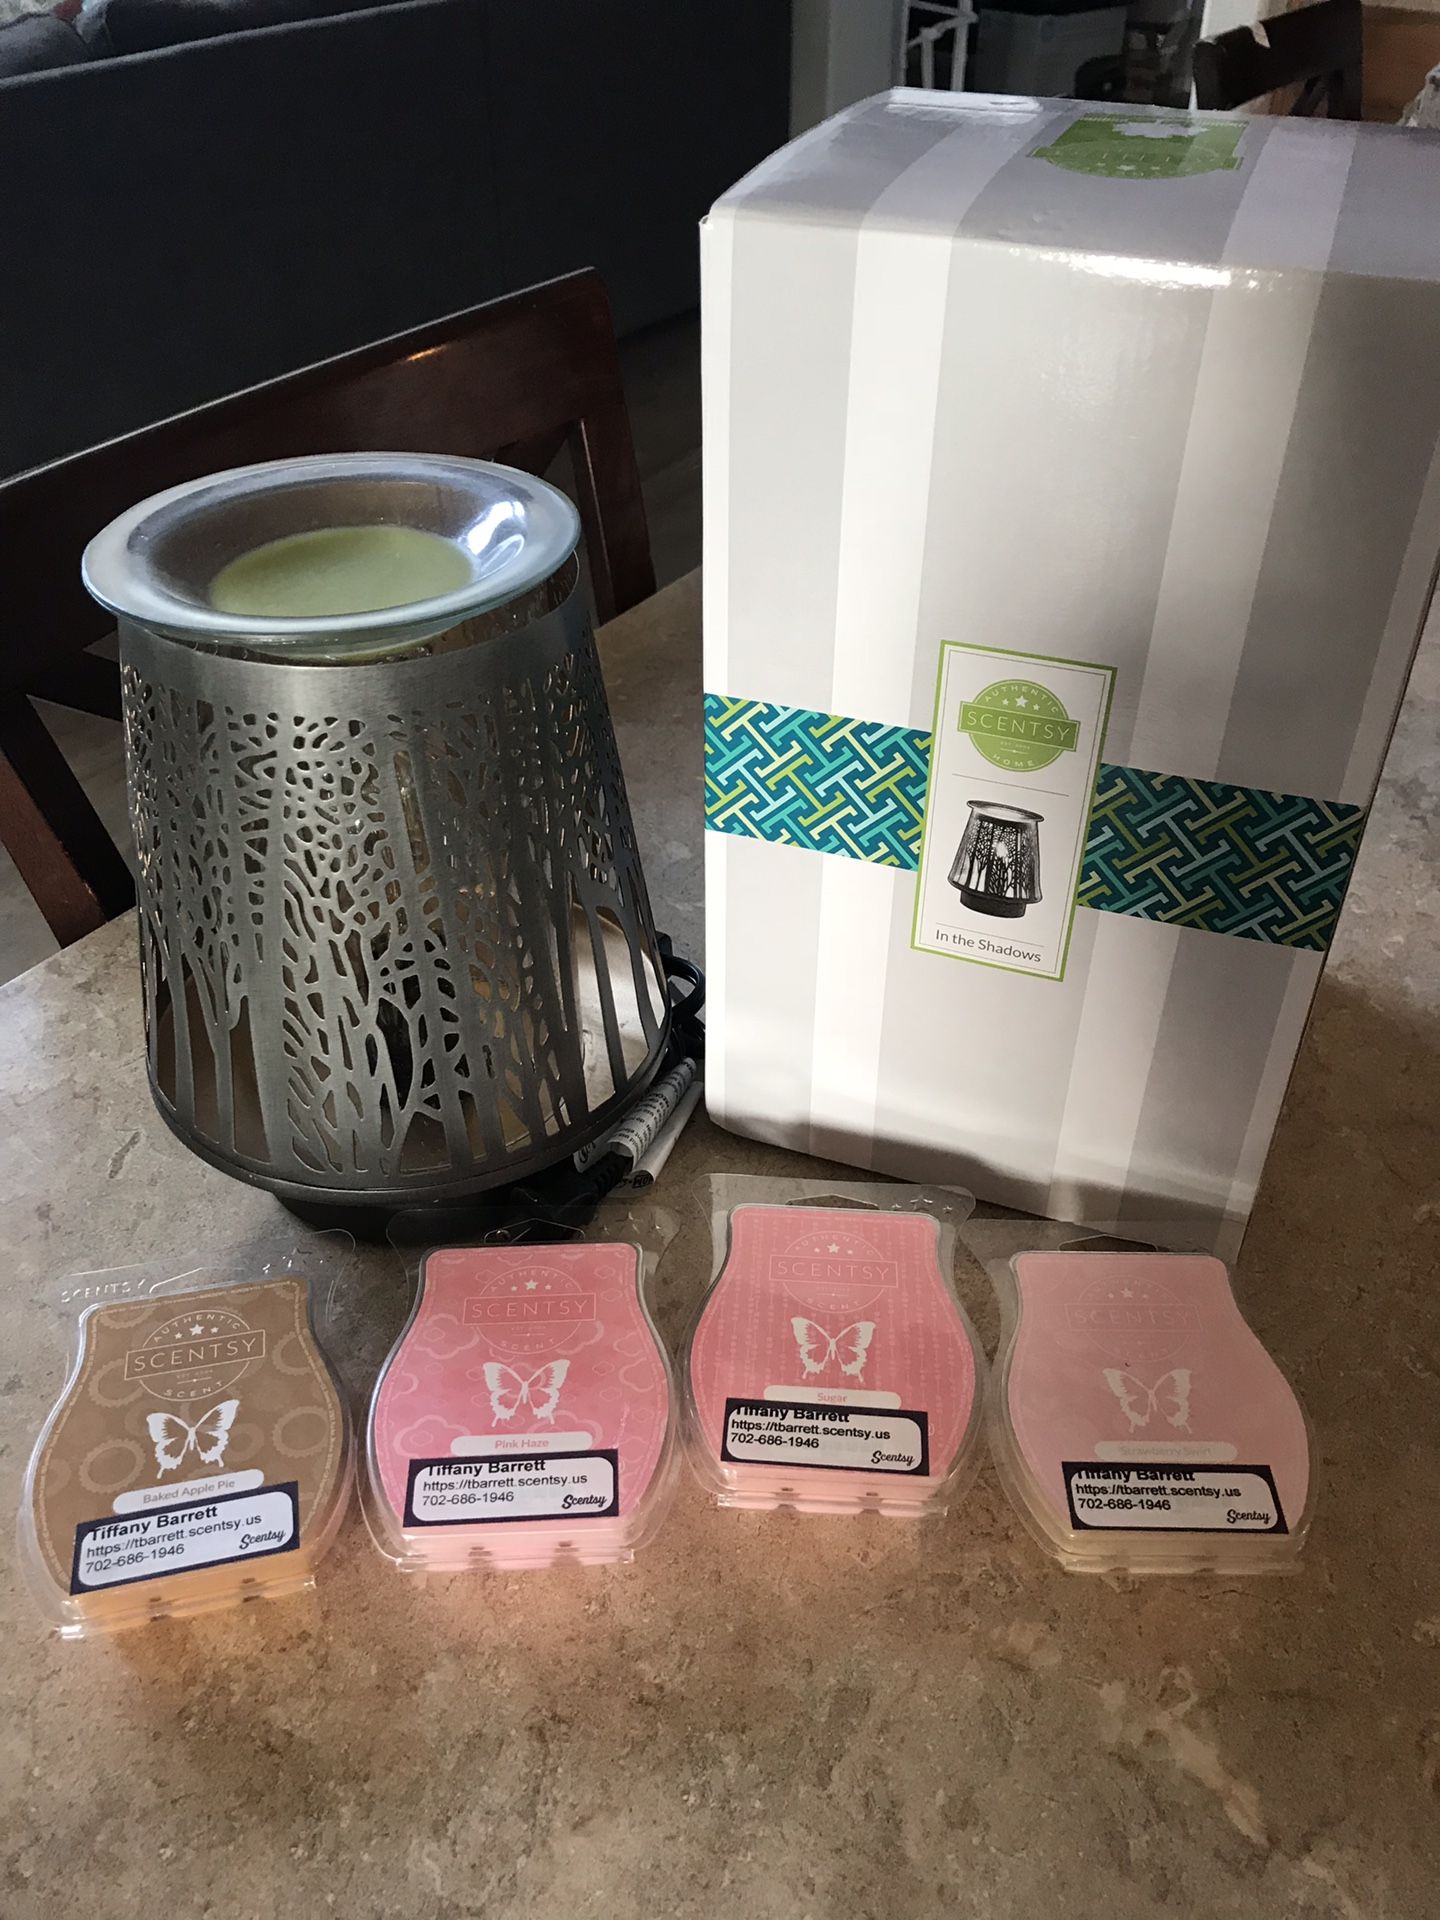 Scentsy warmer and bars